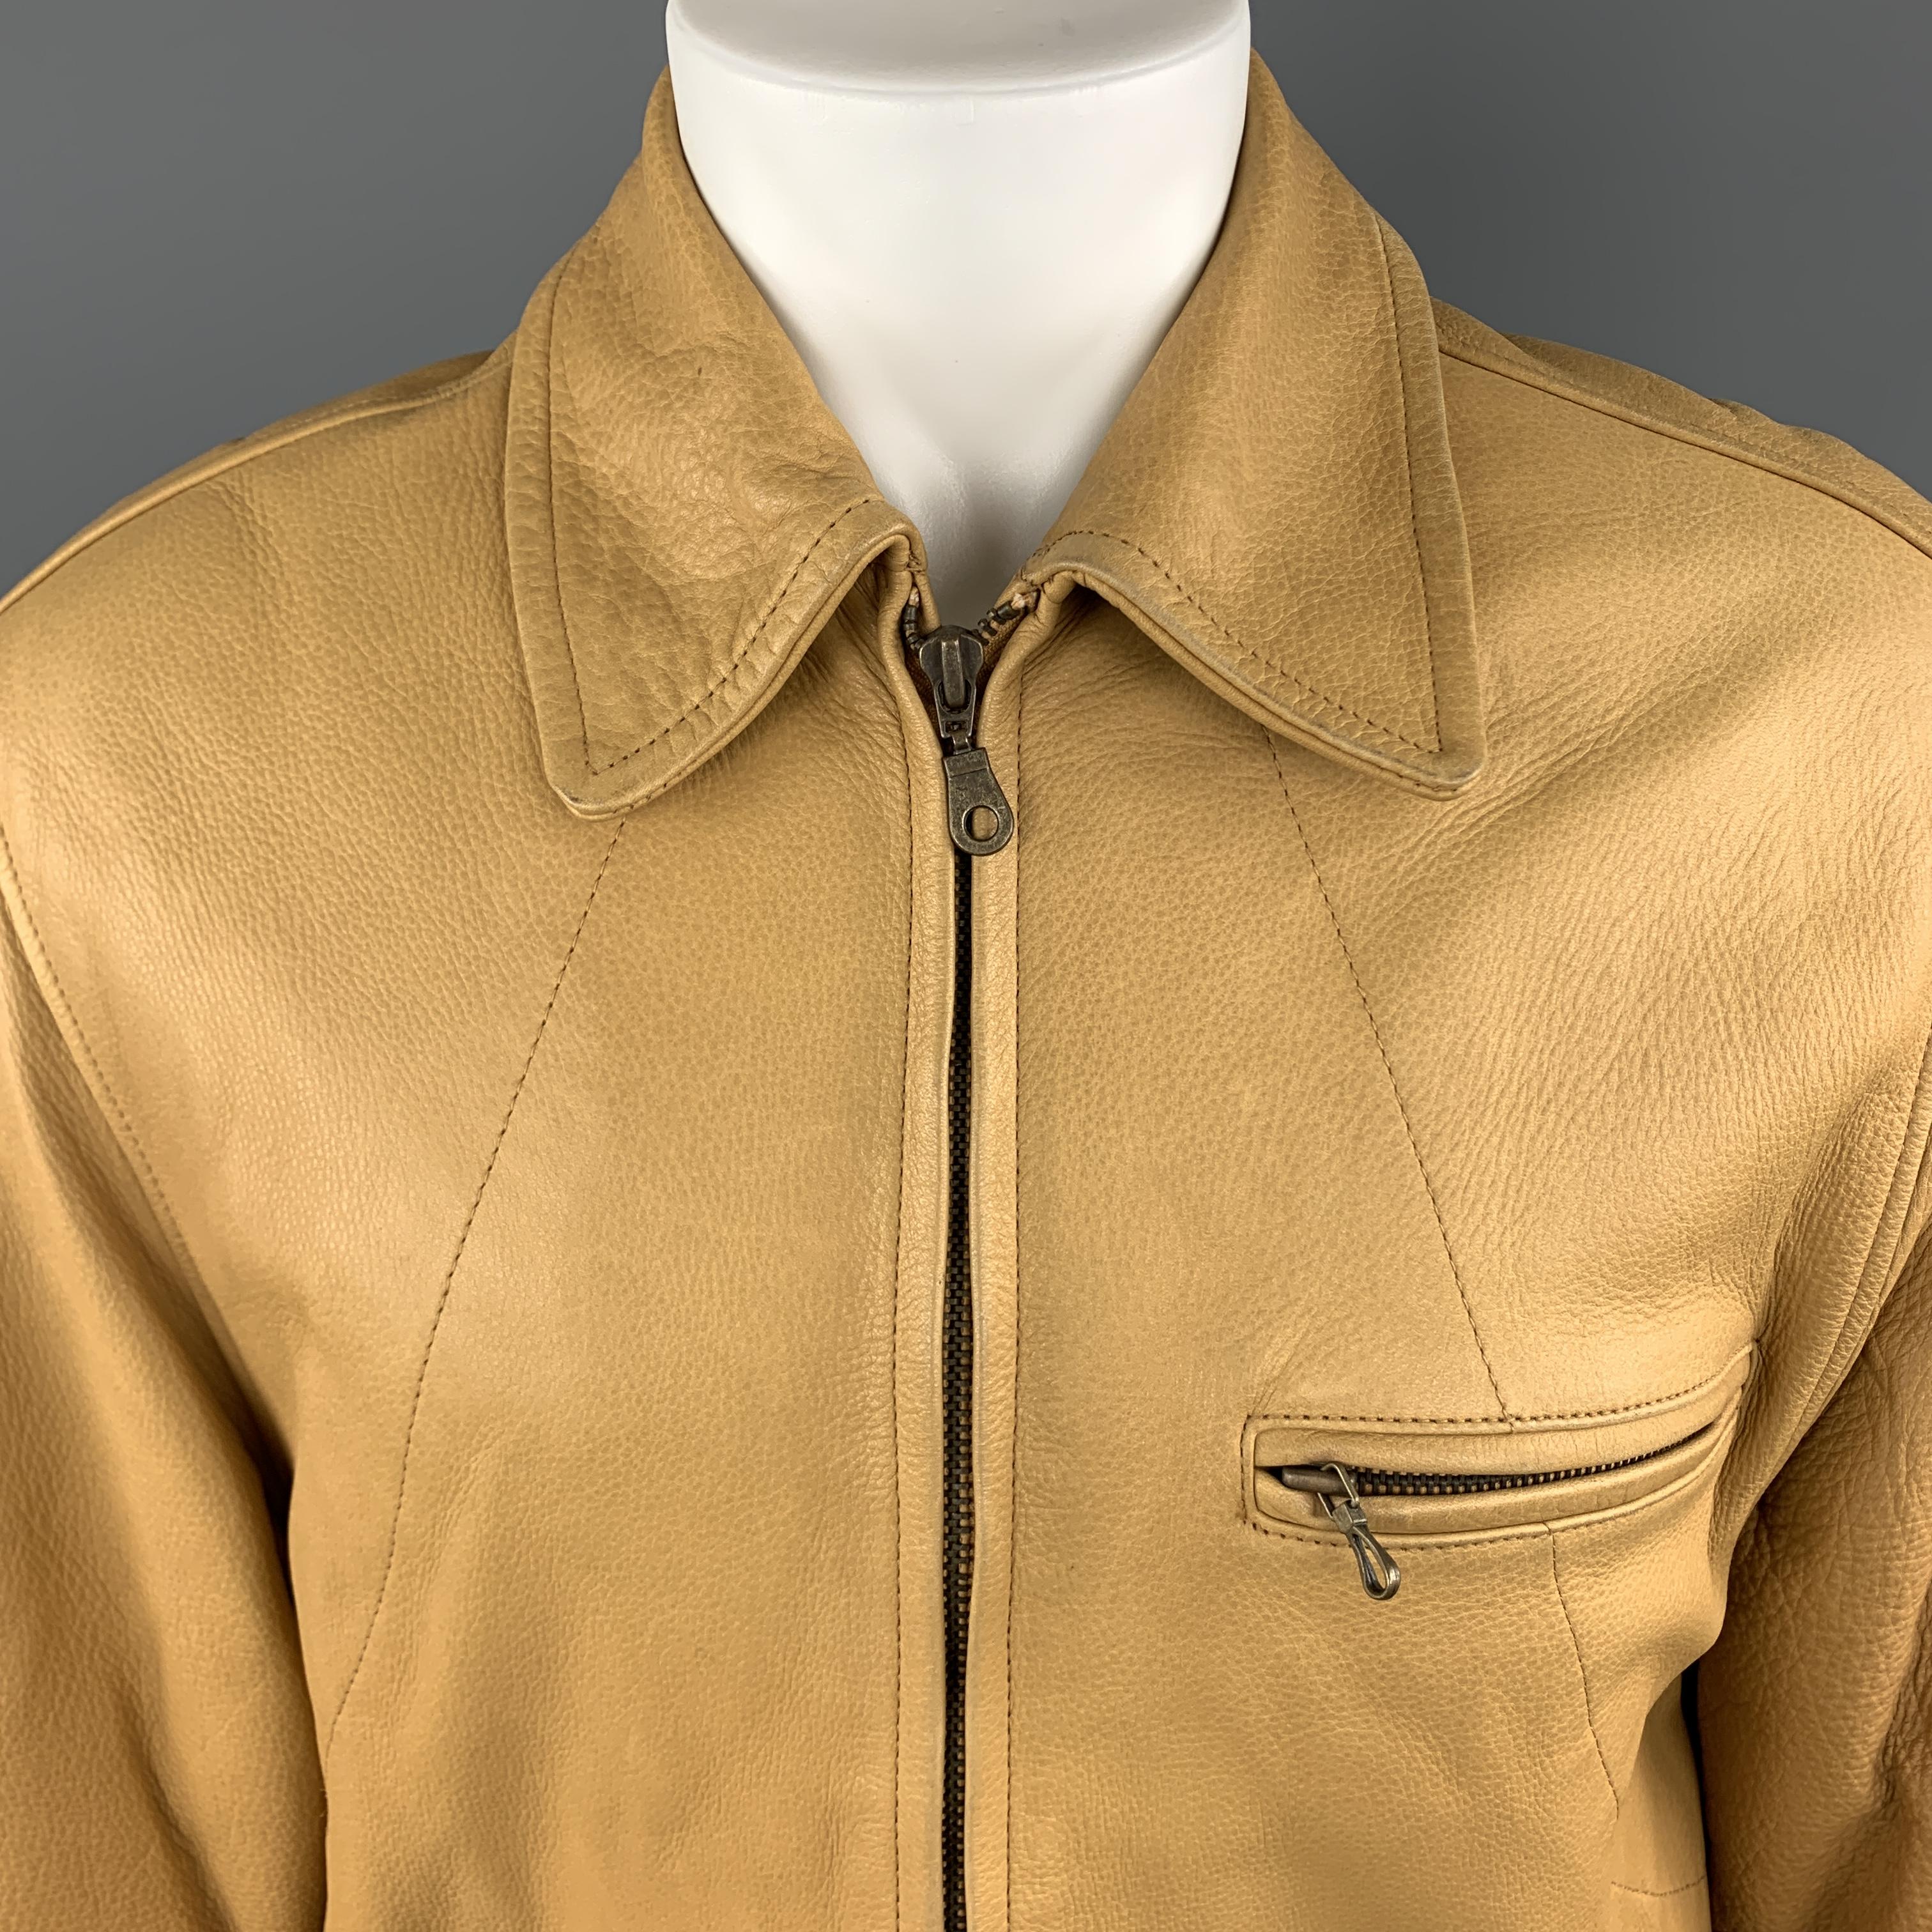 Vintage I. MAGNIN jacket comes in tan khaki textured leather with a pointed collar, zip front, slanted and zip pocket, and side tabs. 

Very Good Pre-Owned Condition.
Marked: S

Measurements:

Shoulder: 18 in.
Bust: 44 in.
Sleeve: 23.5 in.
Length: